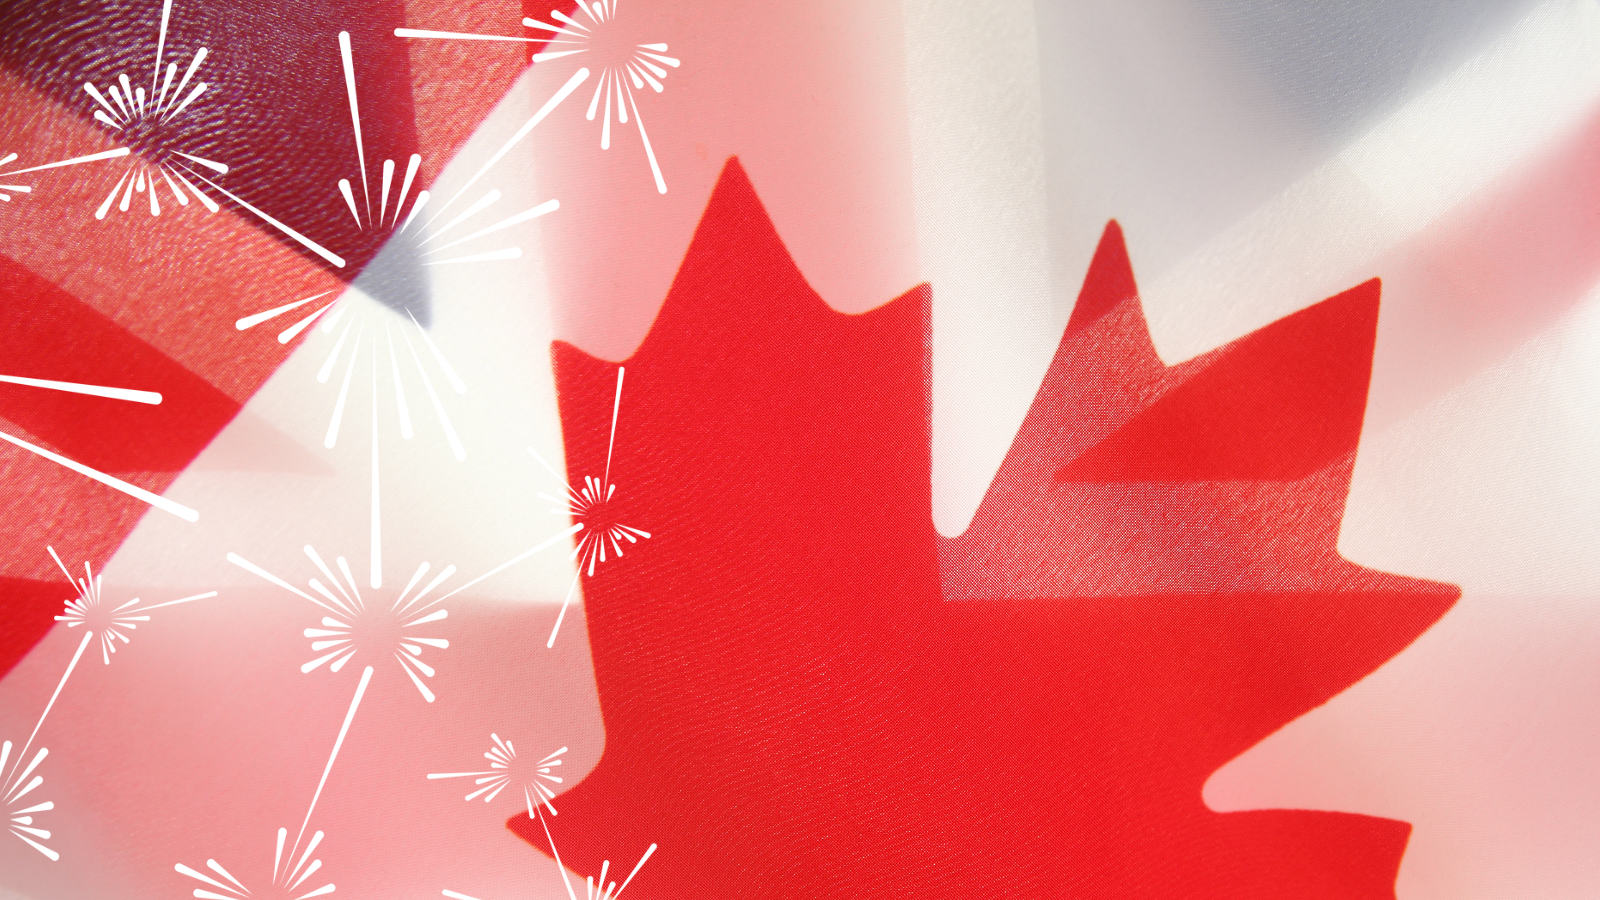 Translucent UK and Canadian flags overlaid, with the ISIS starburst pattern on top.